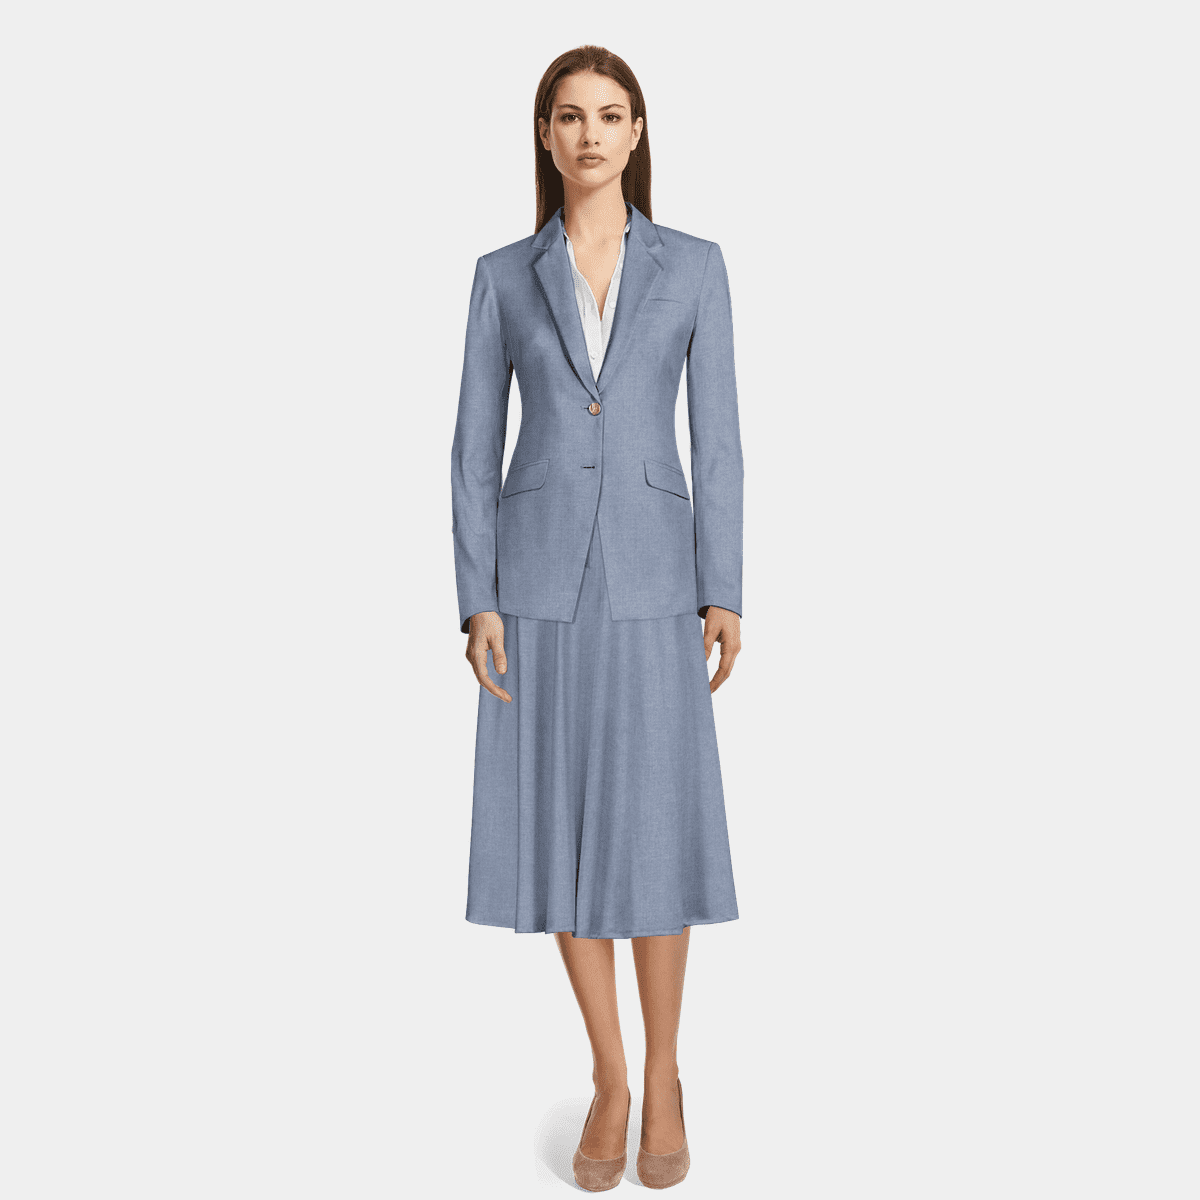 Pink 3-button stretch Skirt Suit with peak lapels